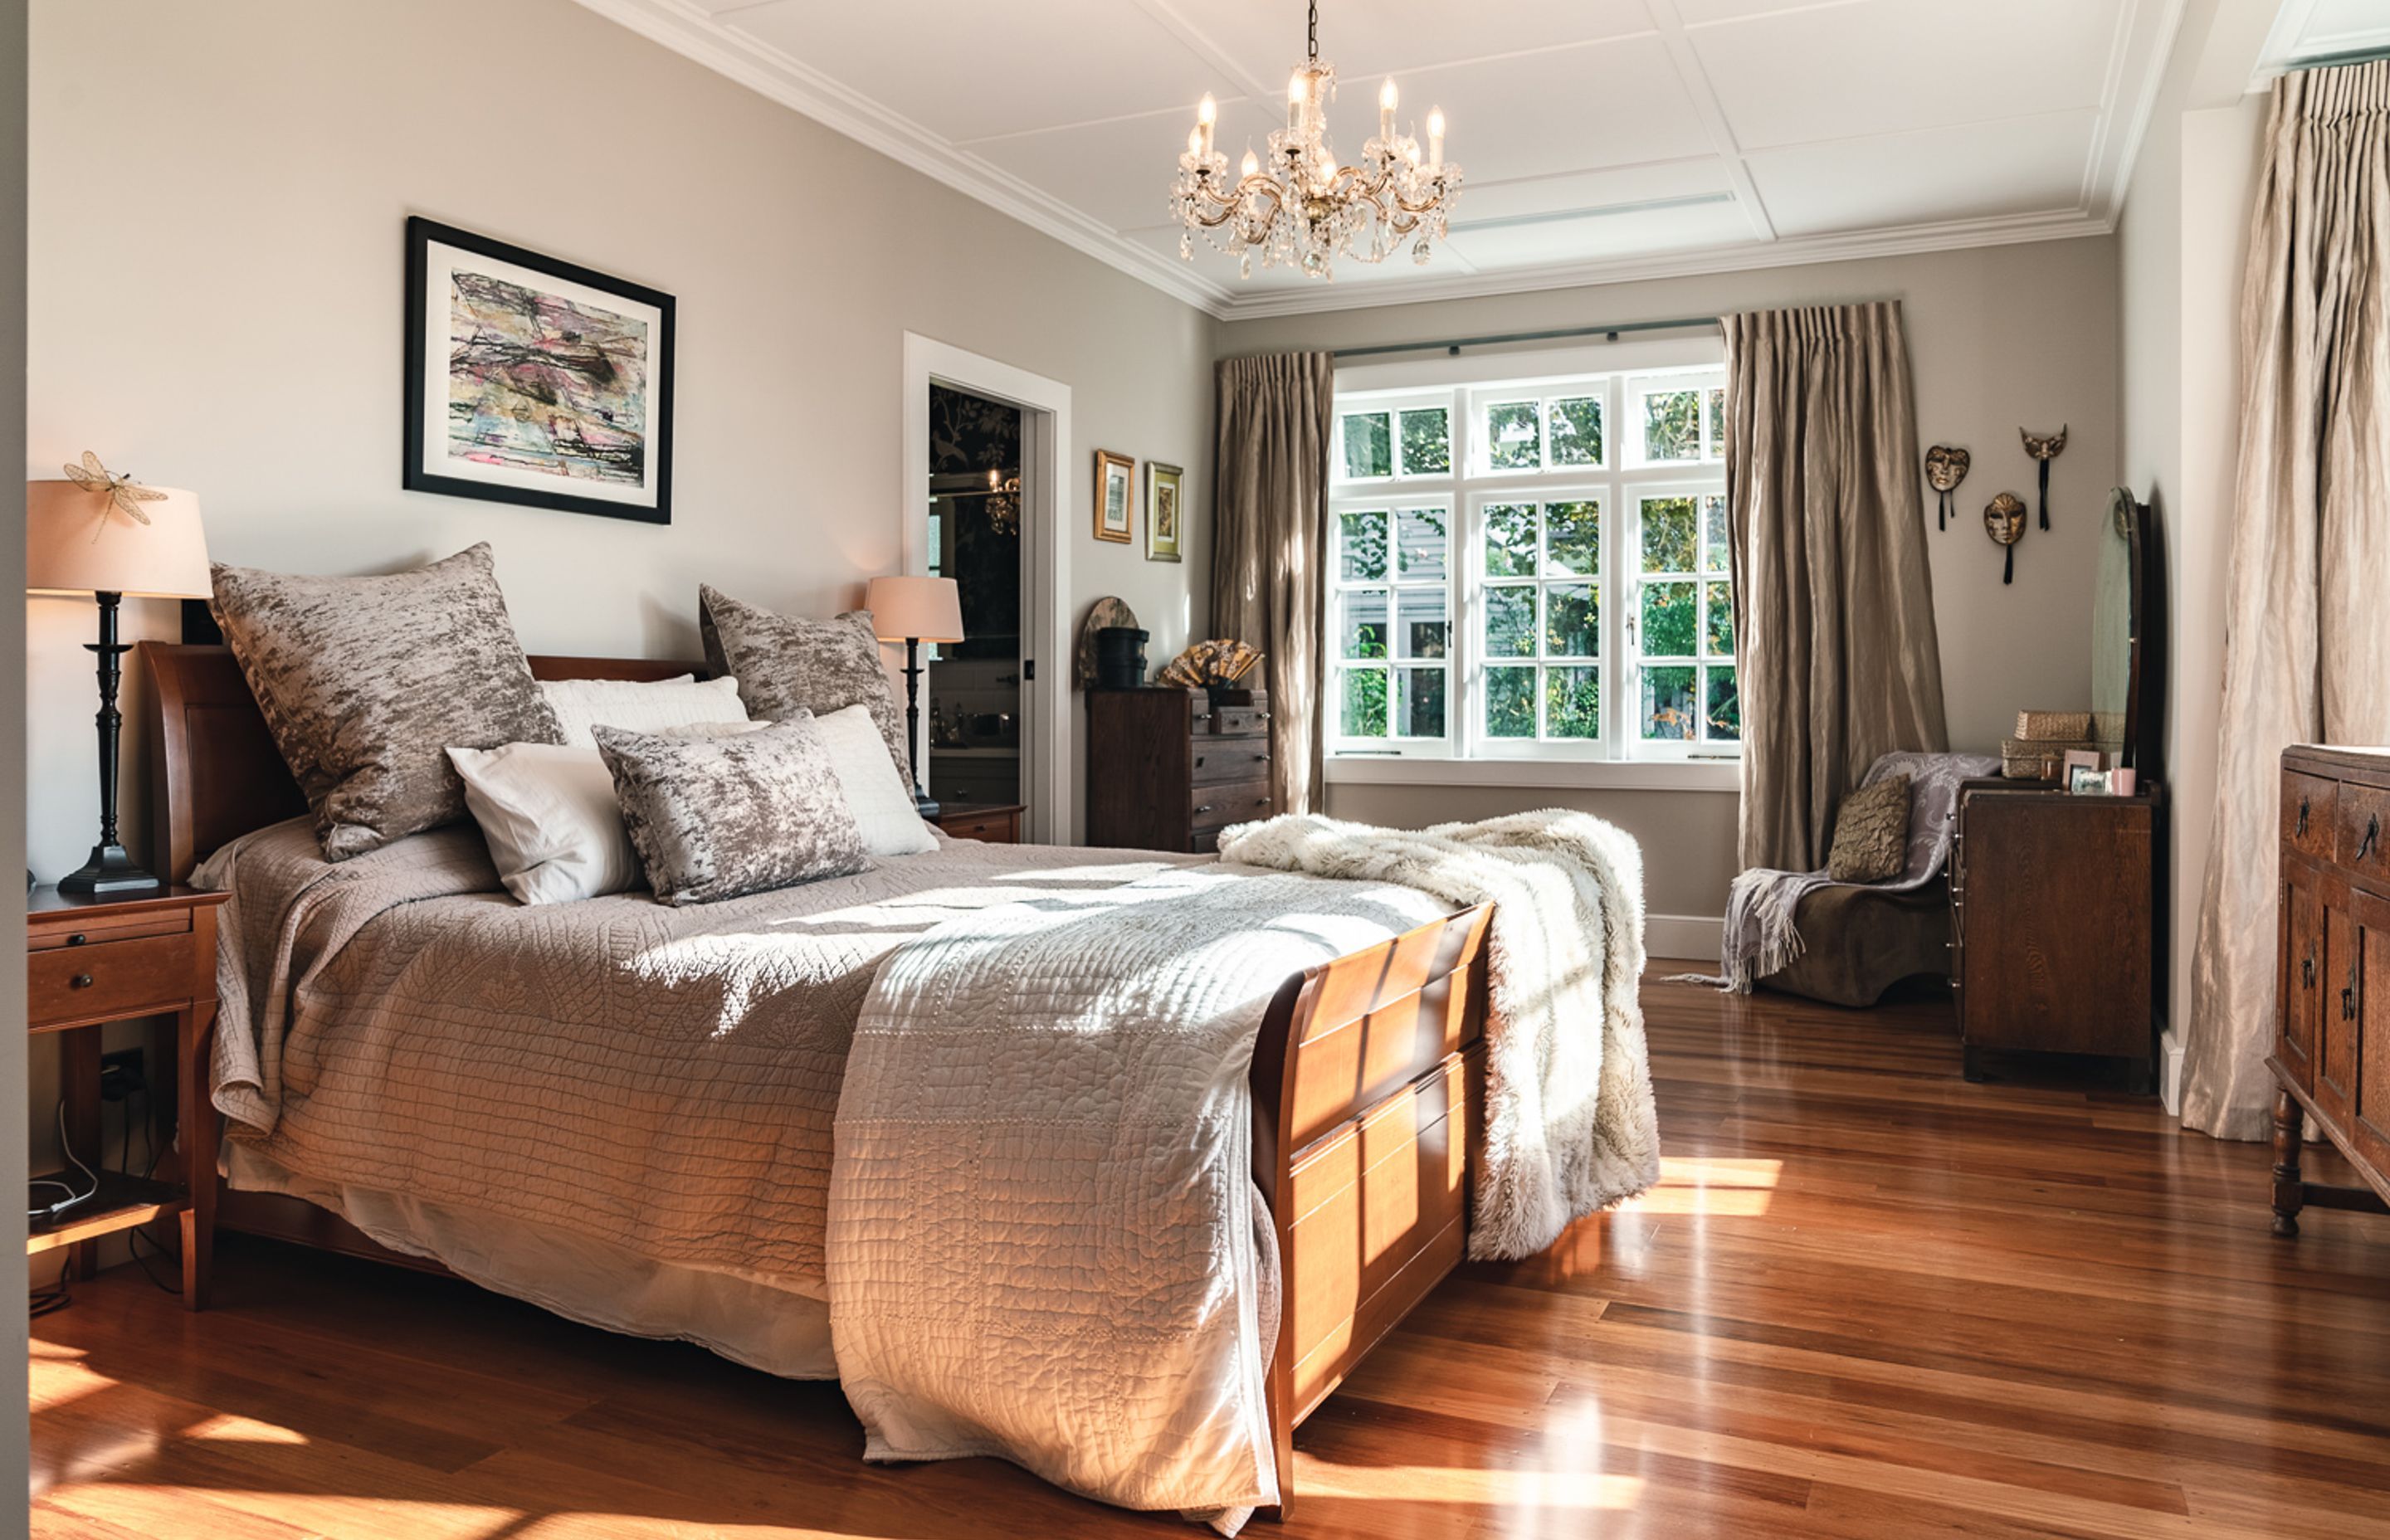 Upstairs, the master bedroom has a panelled ceiling – a nod to the home’s heritage.